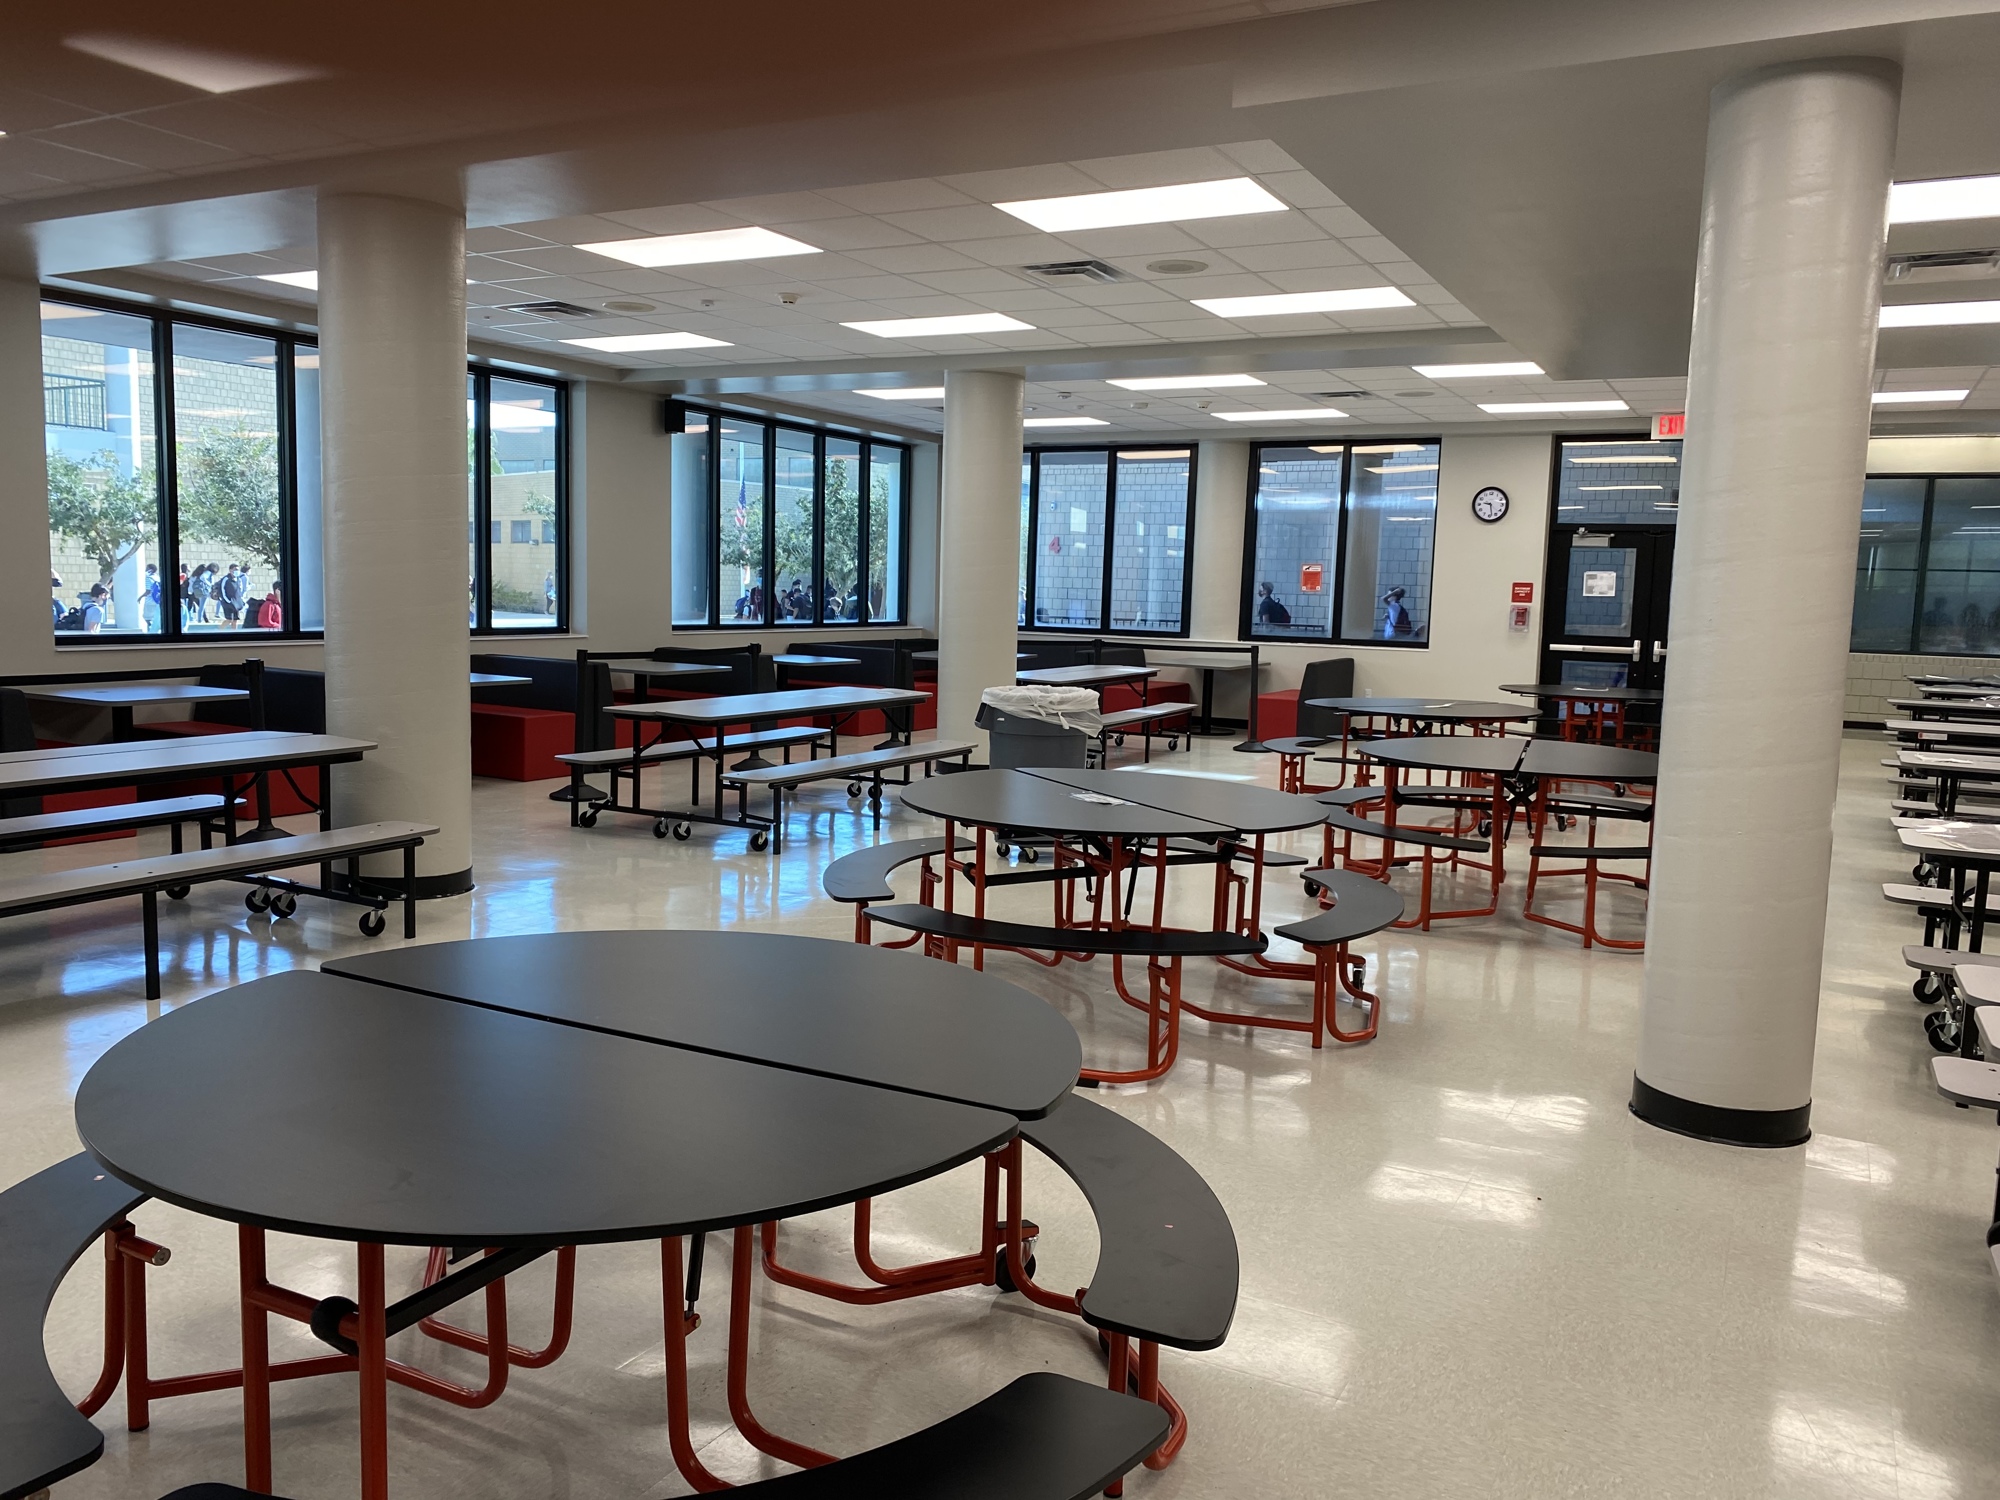 The expansion and renovation of Braden River Middle School's cafeteria is complete. Courtesy photo.